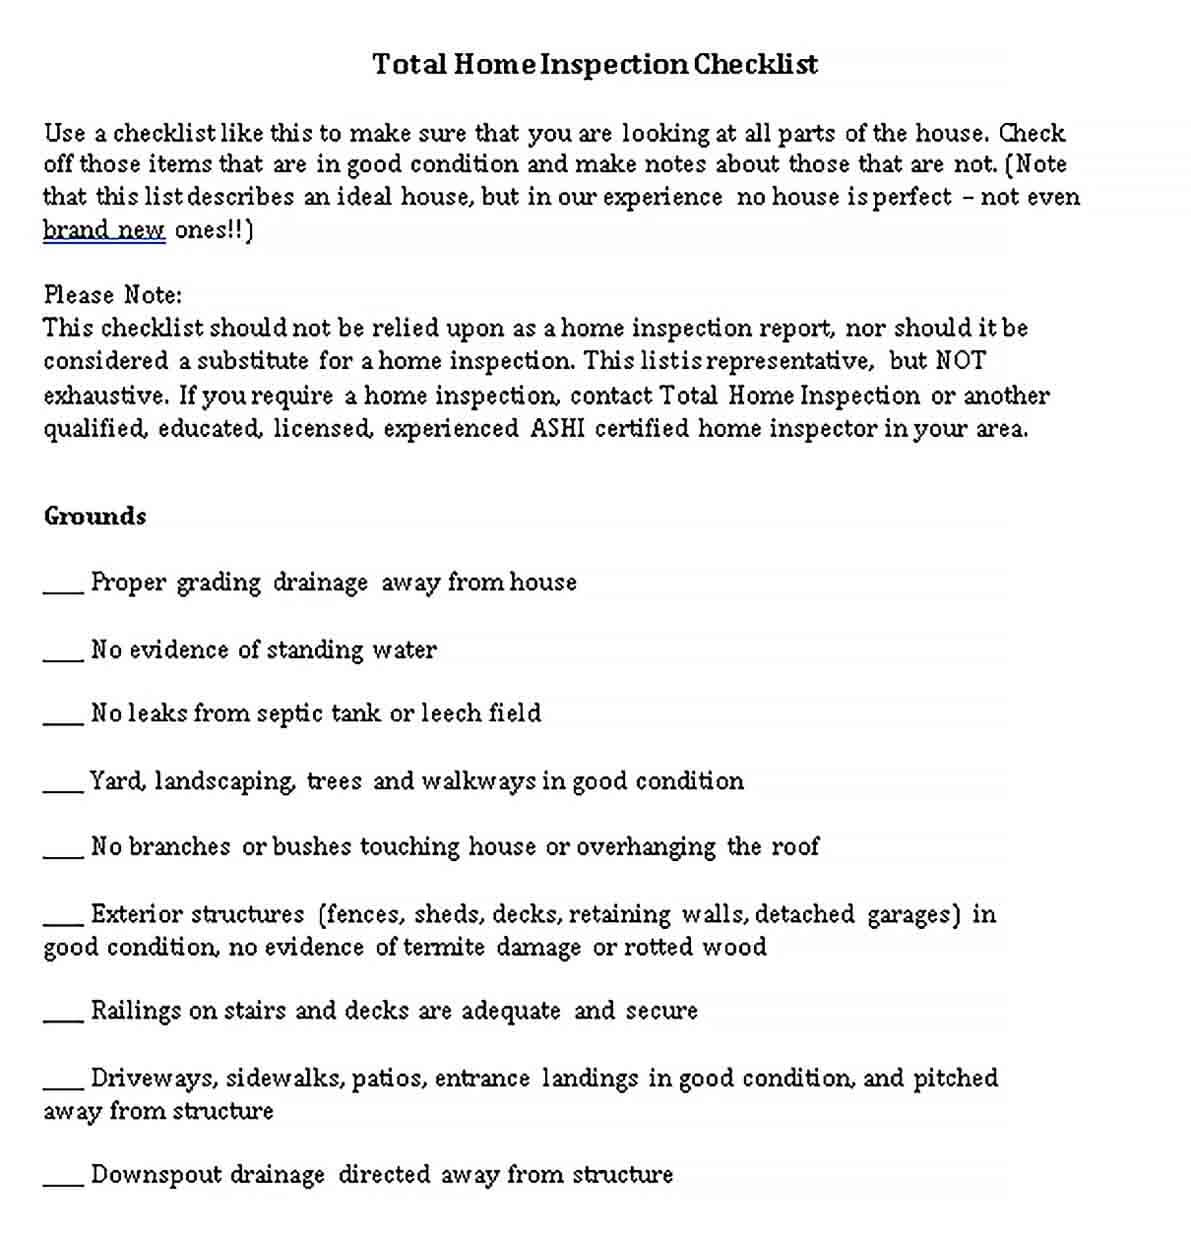 Sample Total Home Inspection Checklist Template